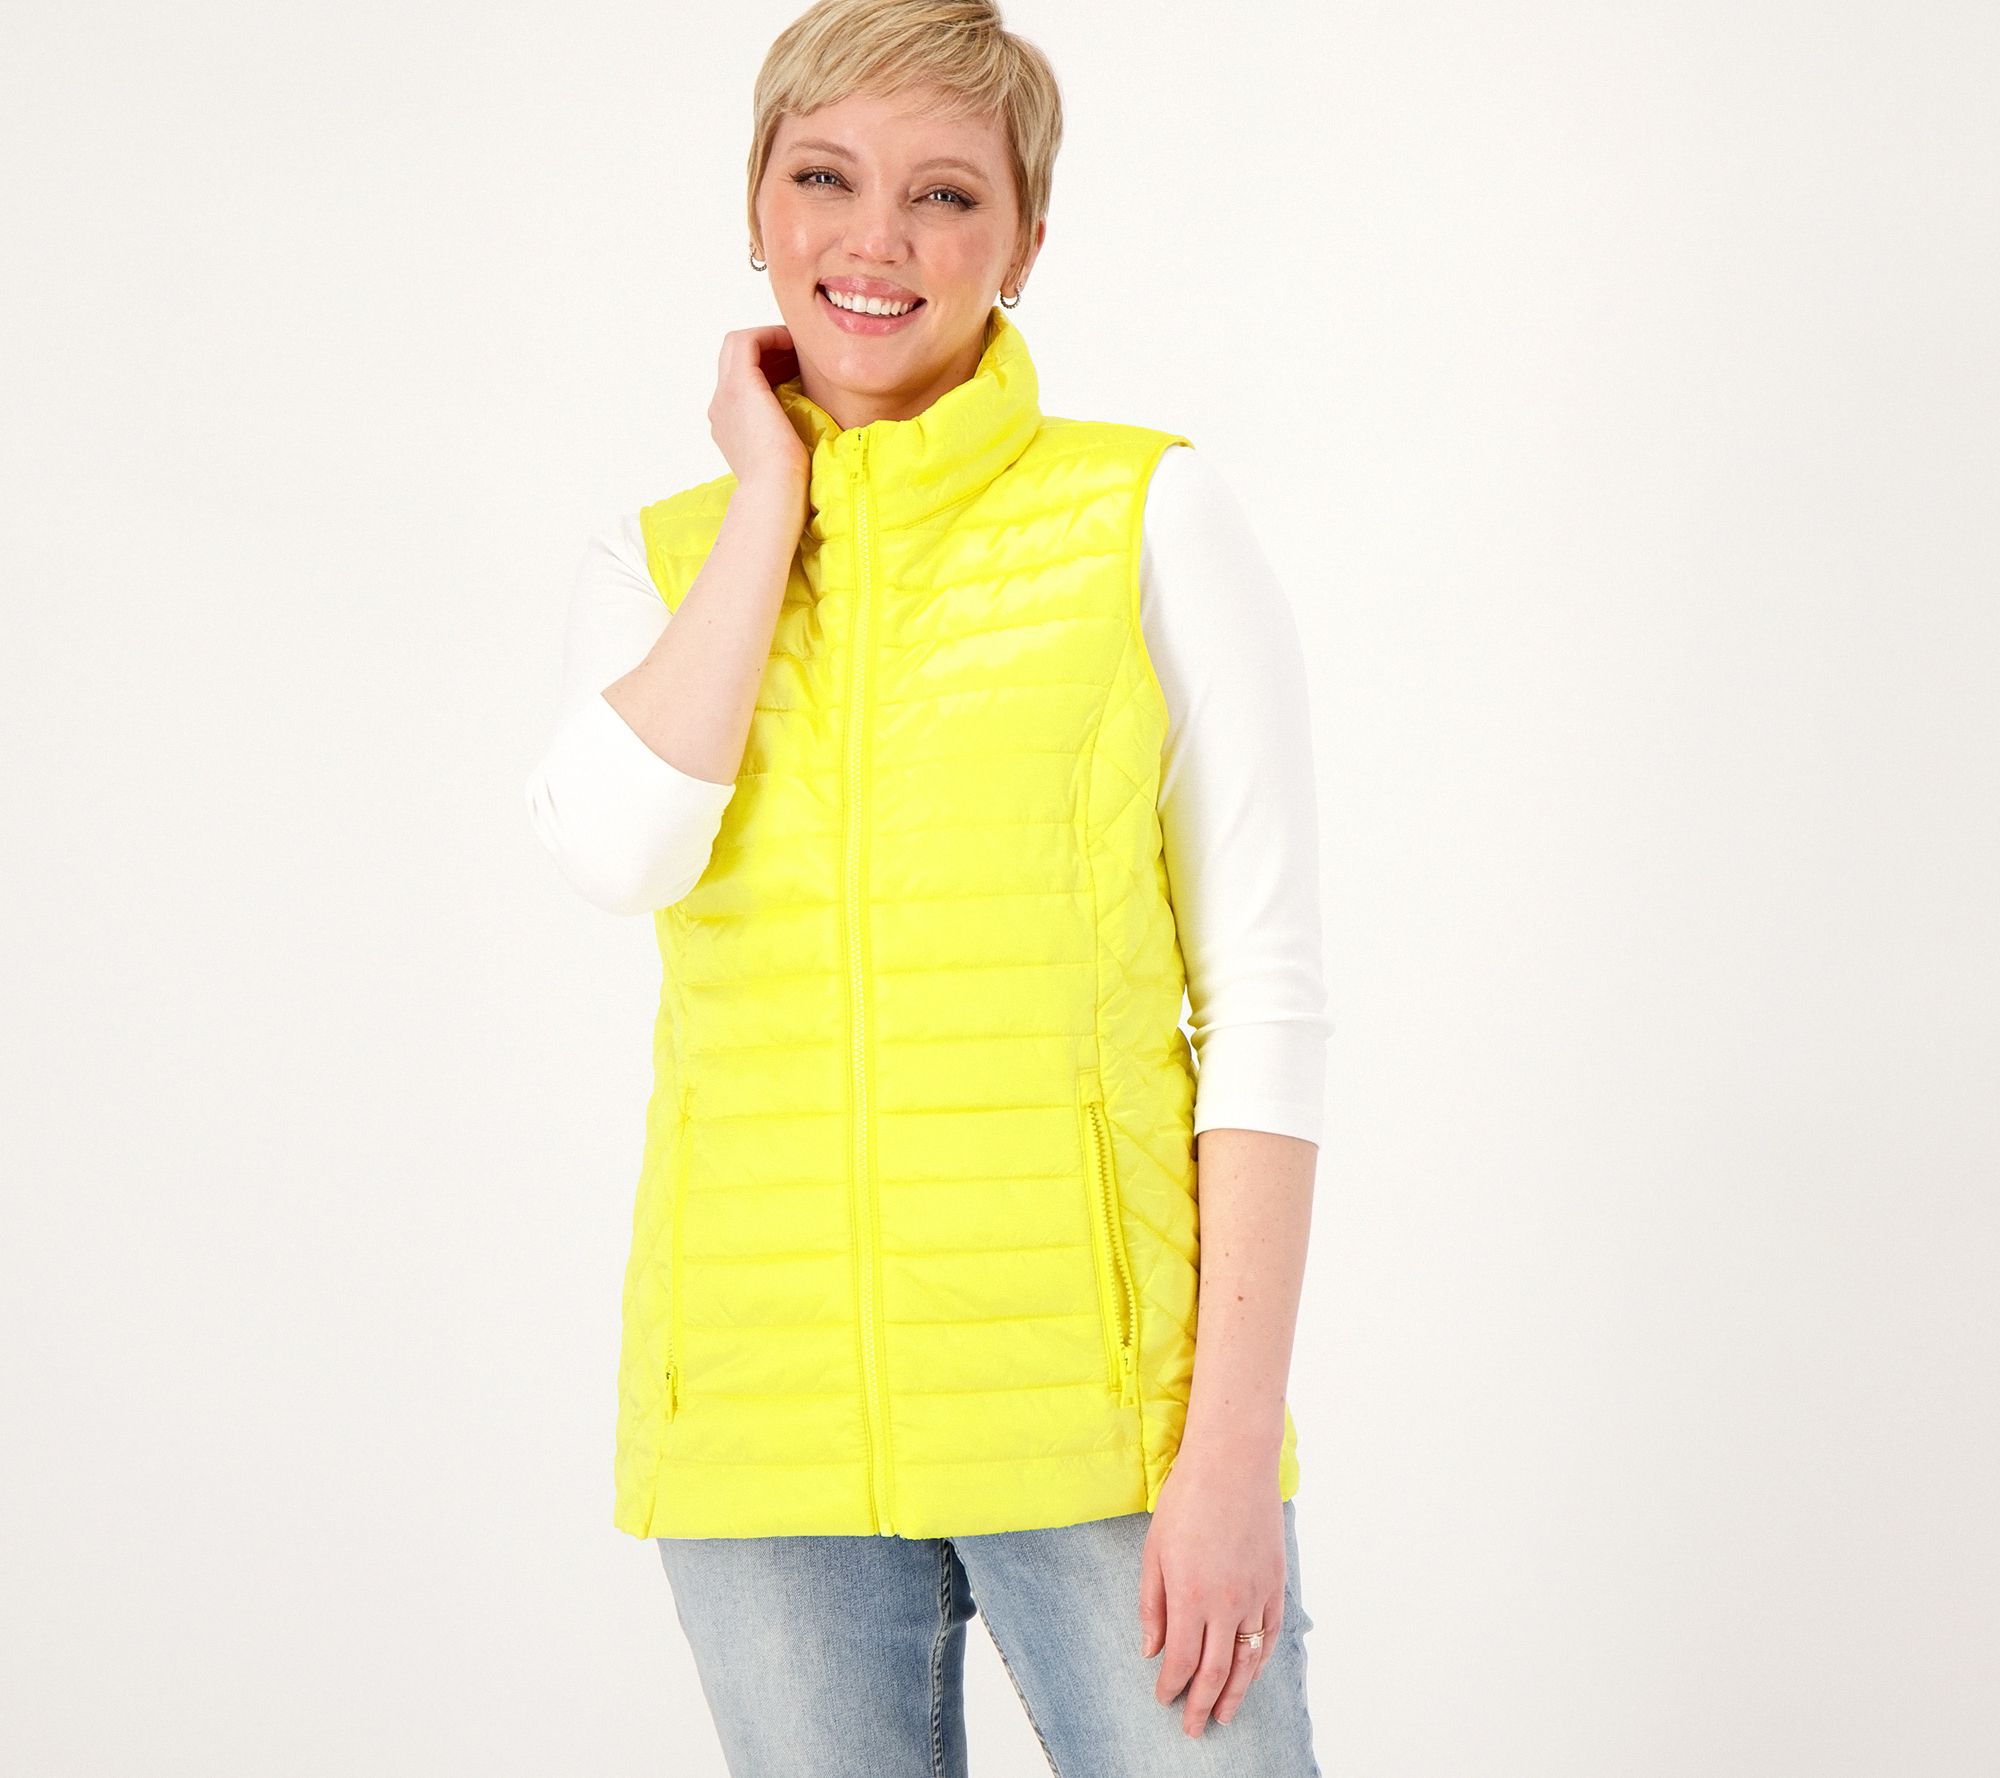 Nuage Packable Puffer Vest with Mock Collar - QVC.com